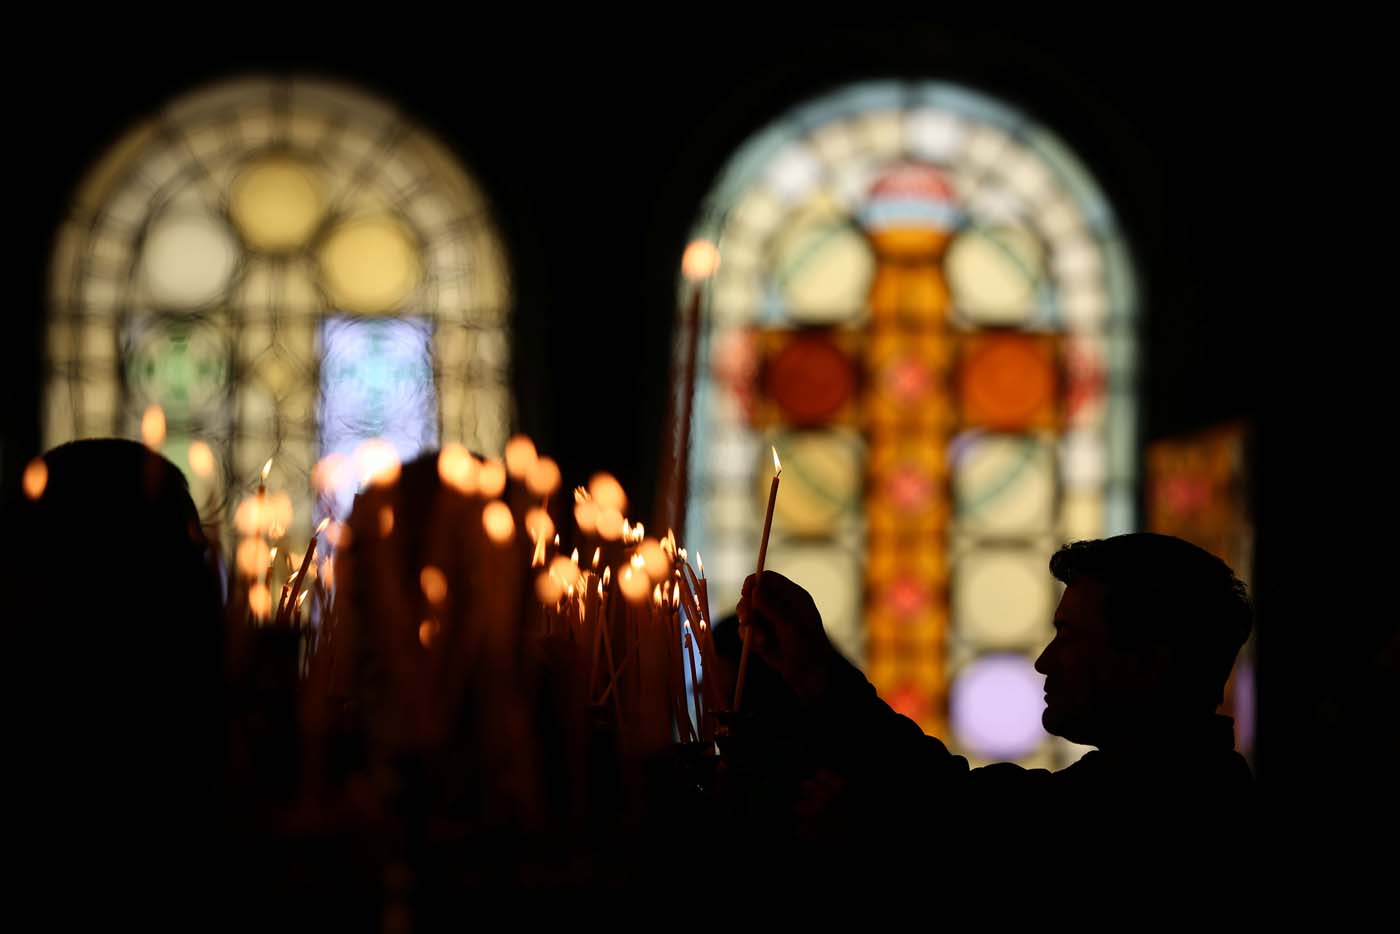 Worshippers light candles during the Palm Sunday service in Alexander Nevsky Cathedral in Sofia, Bulgaria April 9, 2017. REUTERS/Stoyan Nenov